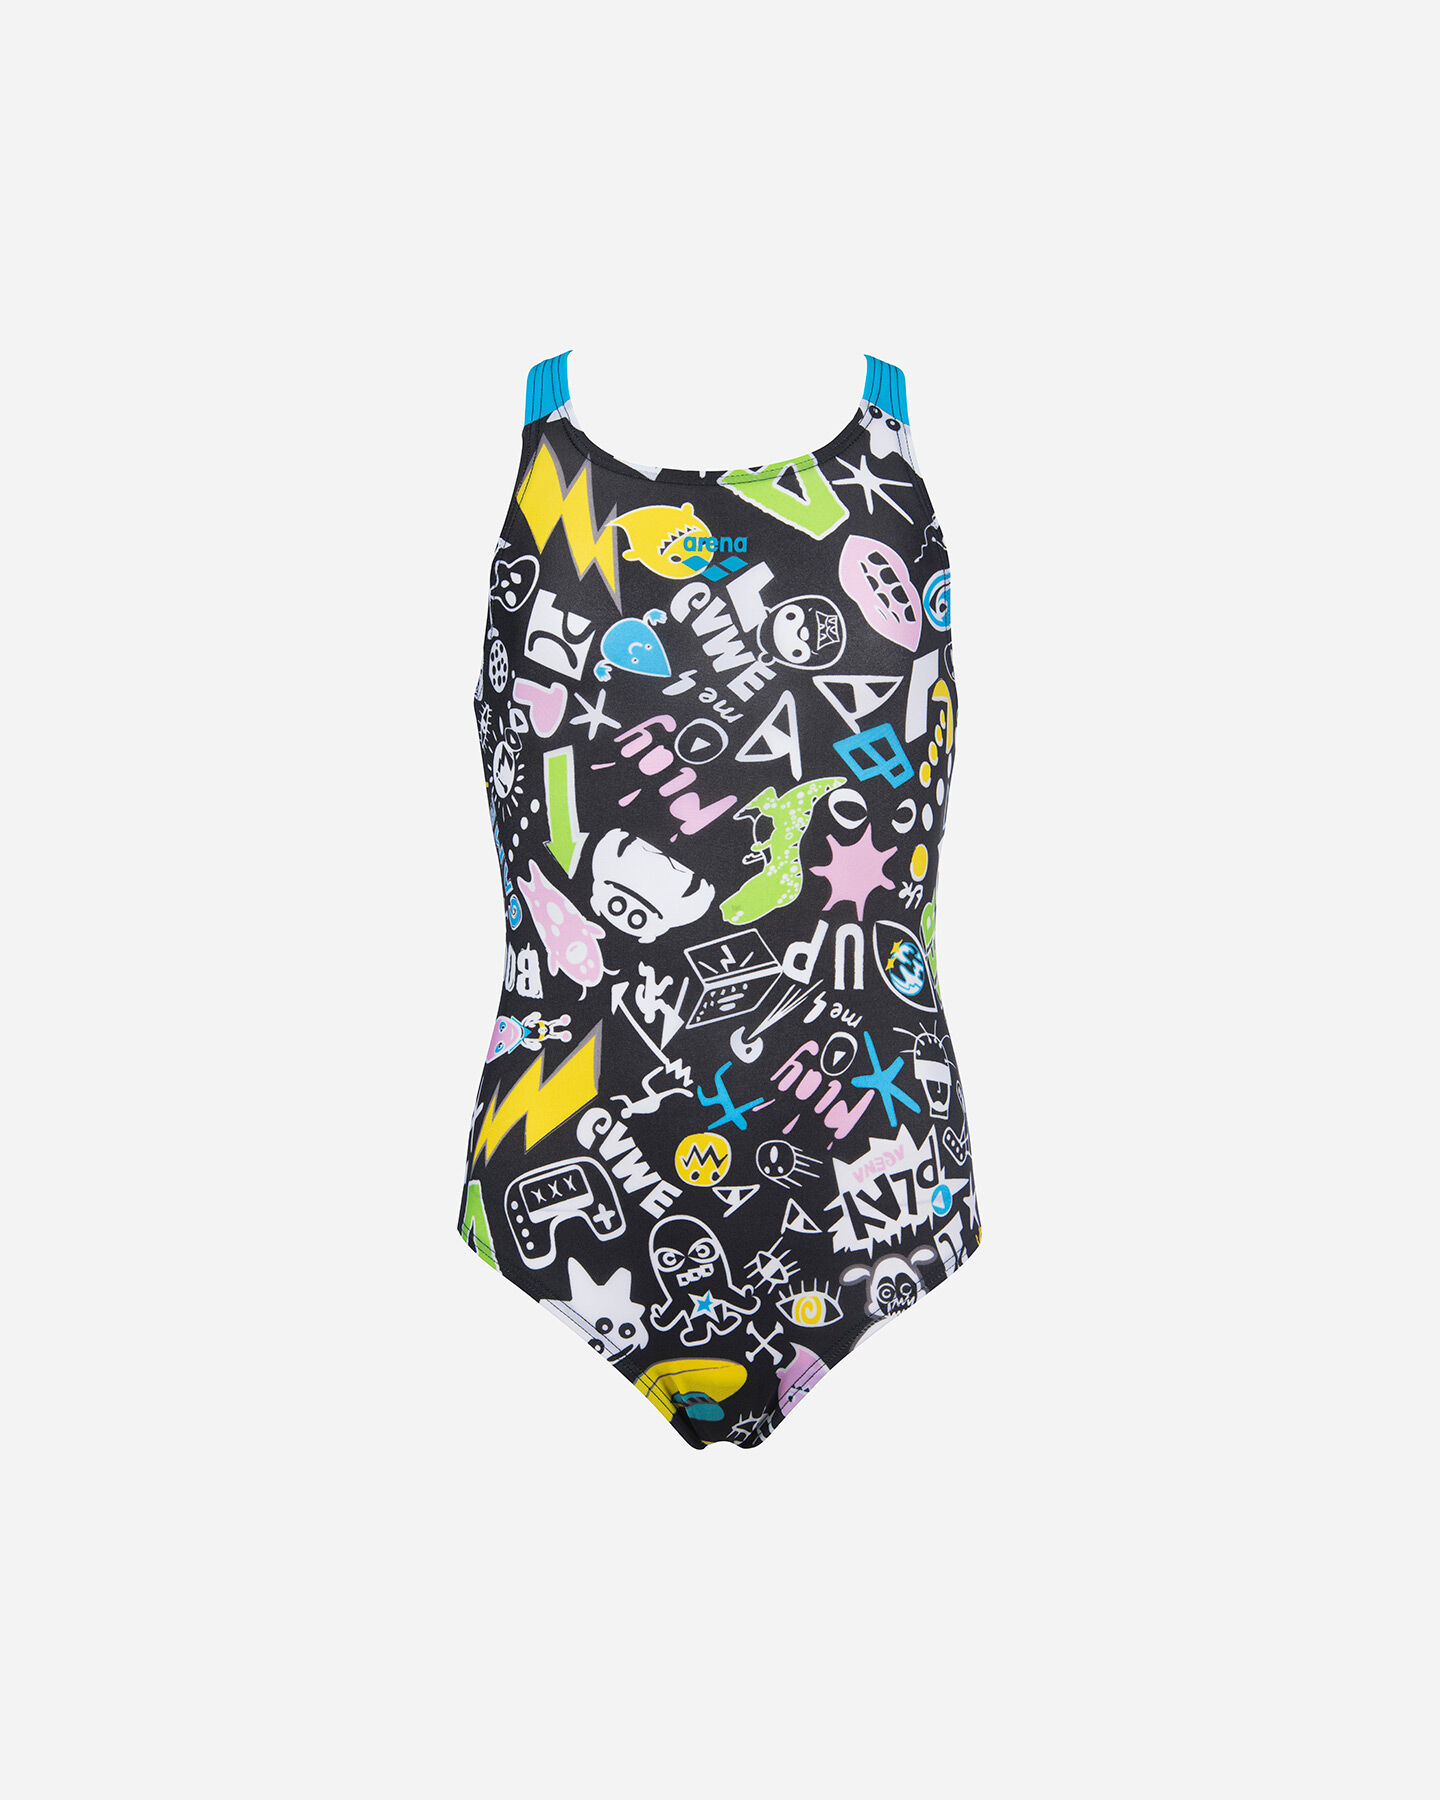  Costume piscina ARENA PLAYFUL PRO BACK JR S5265168|580|6-7 scatto 1